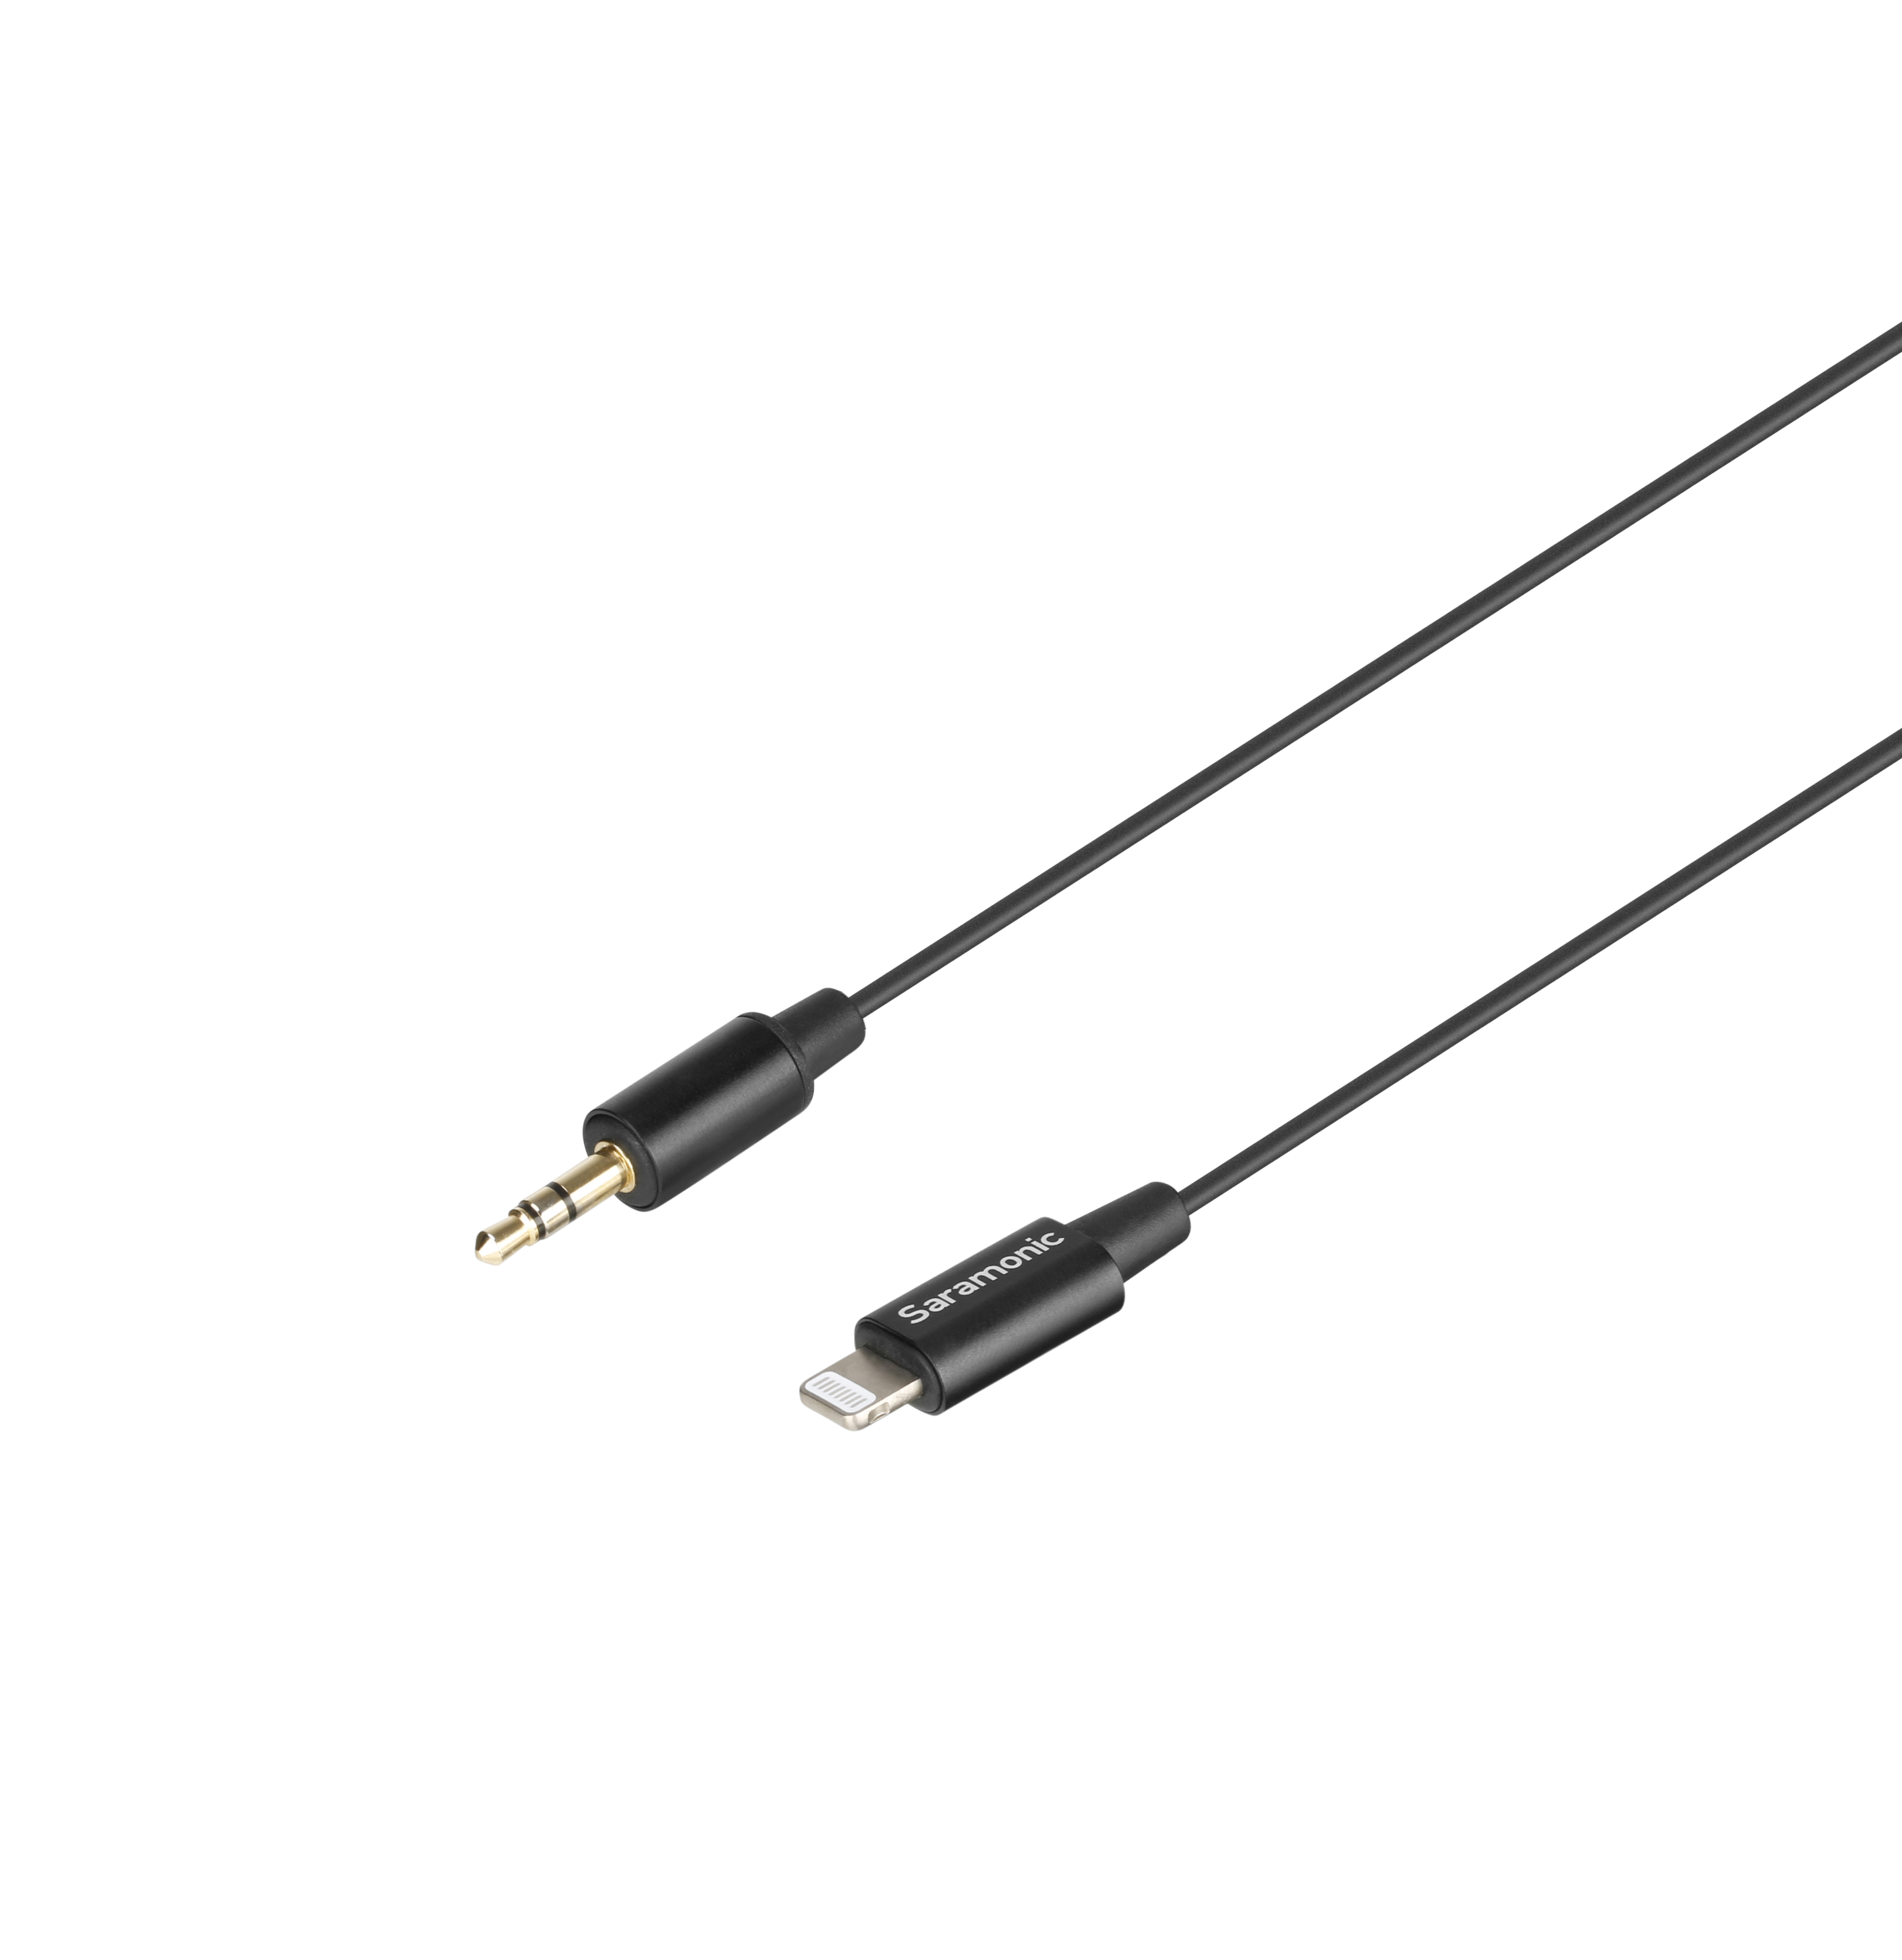 Saramonic 3.5mm TRS Male Jack Adapter Cable 